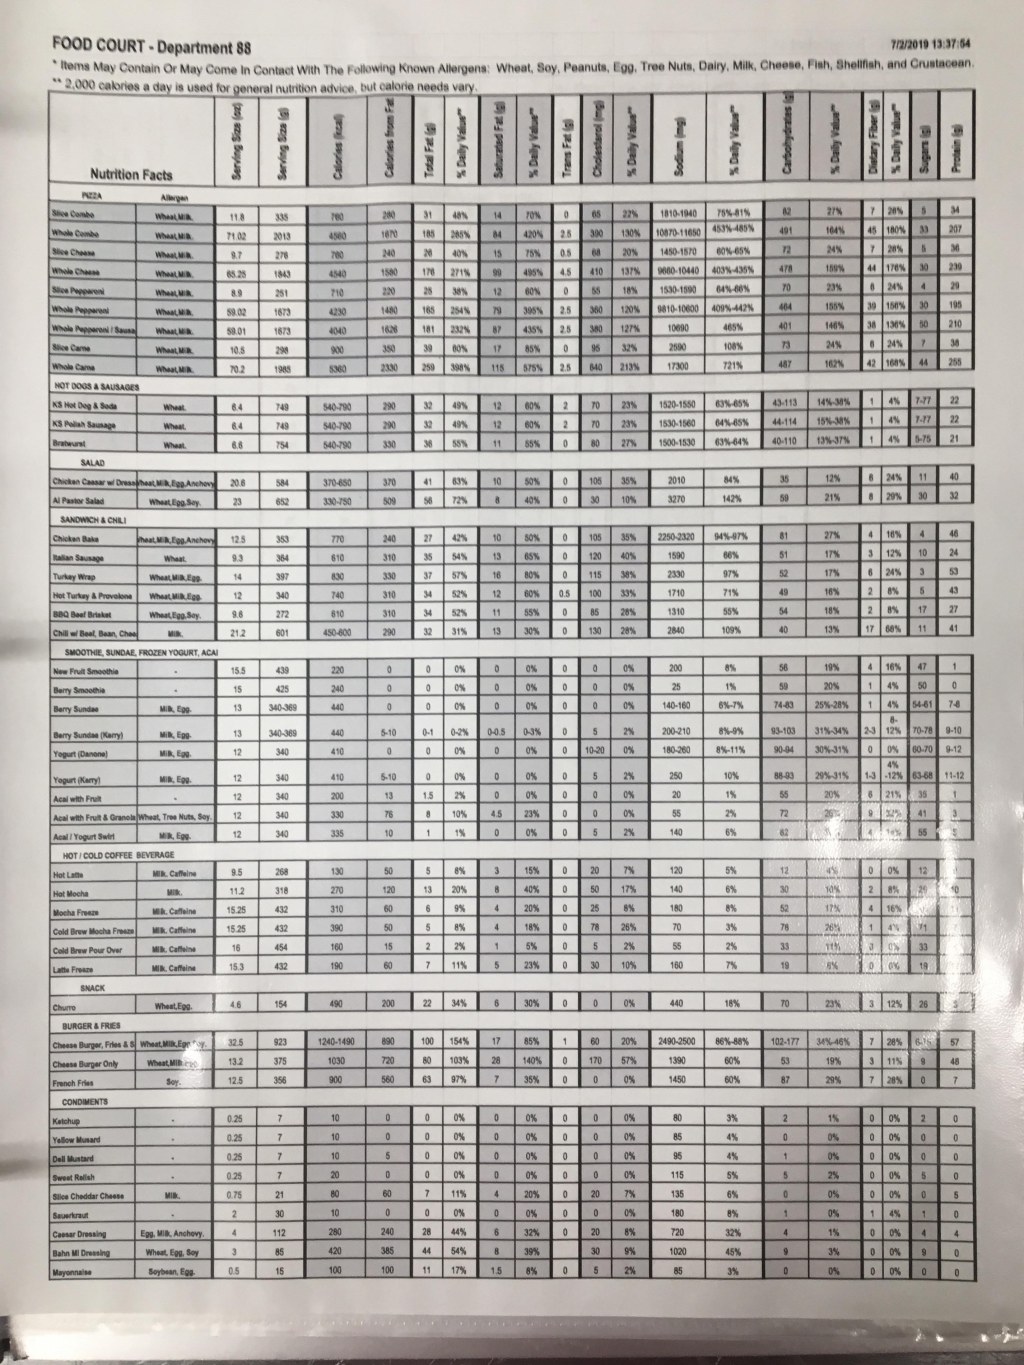 Picture of: Nutrition information for food court items : r/Costco